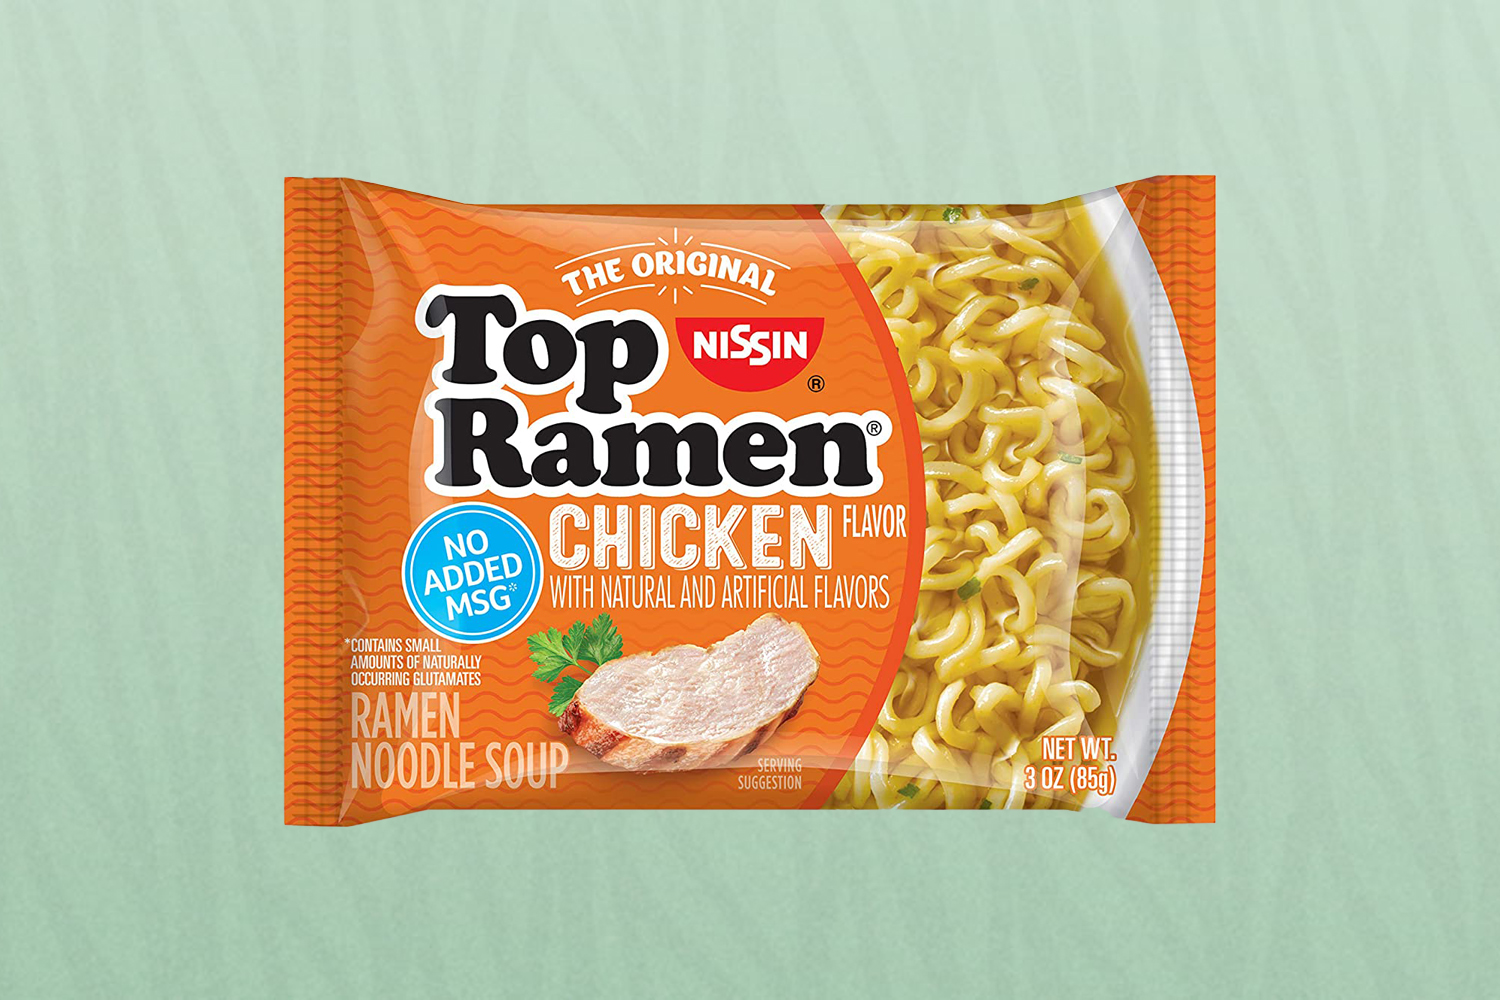 Top Ramen Noodle Soup is one of the best meals to eat while getting high in 2022